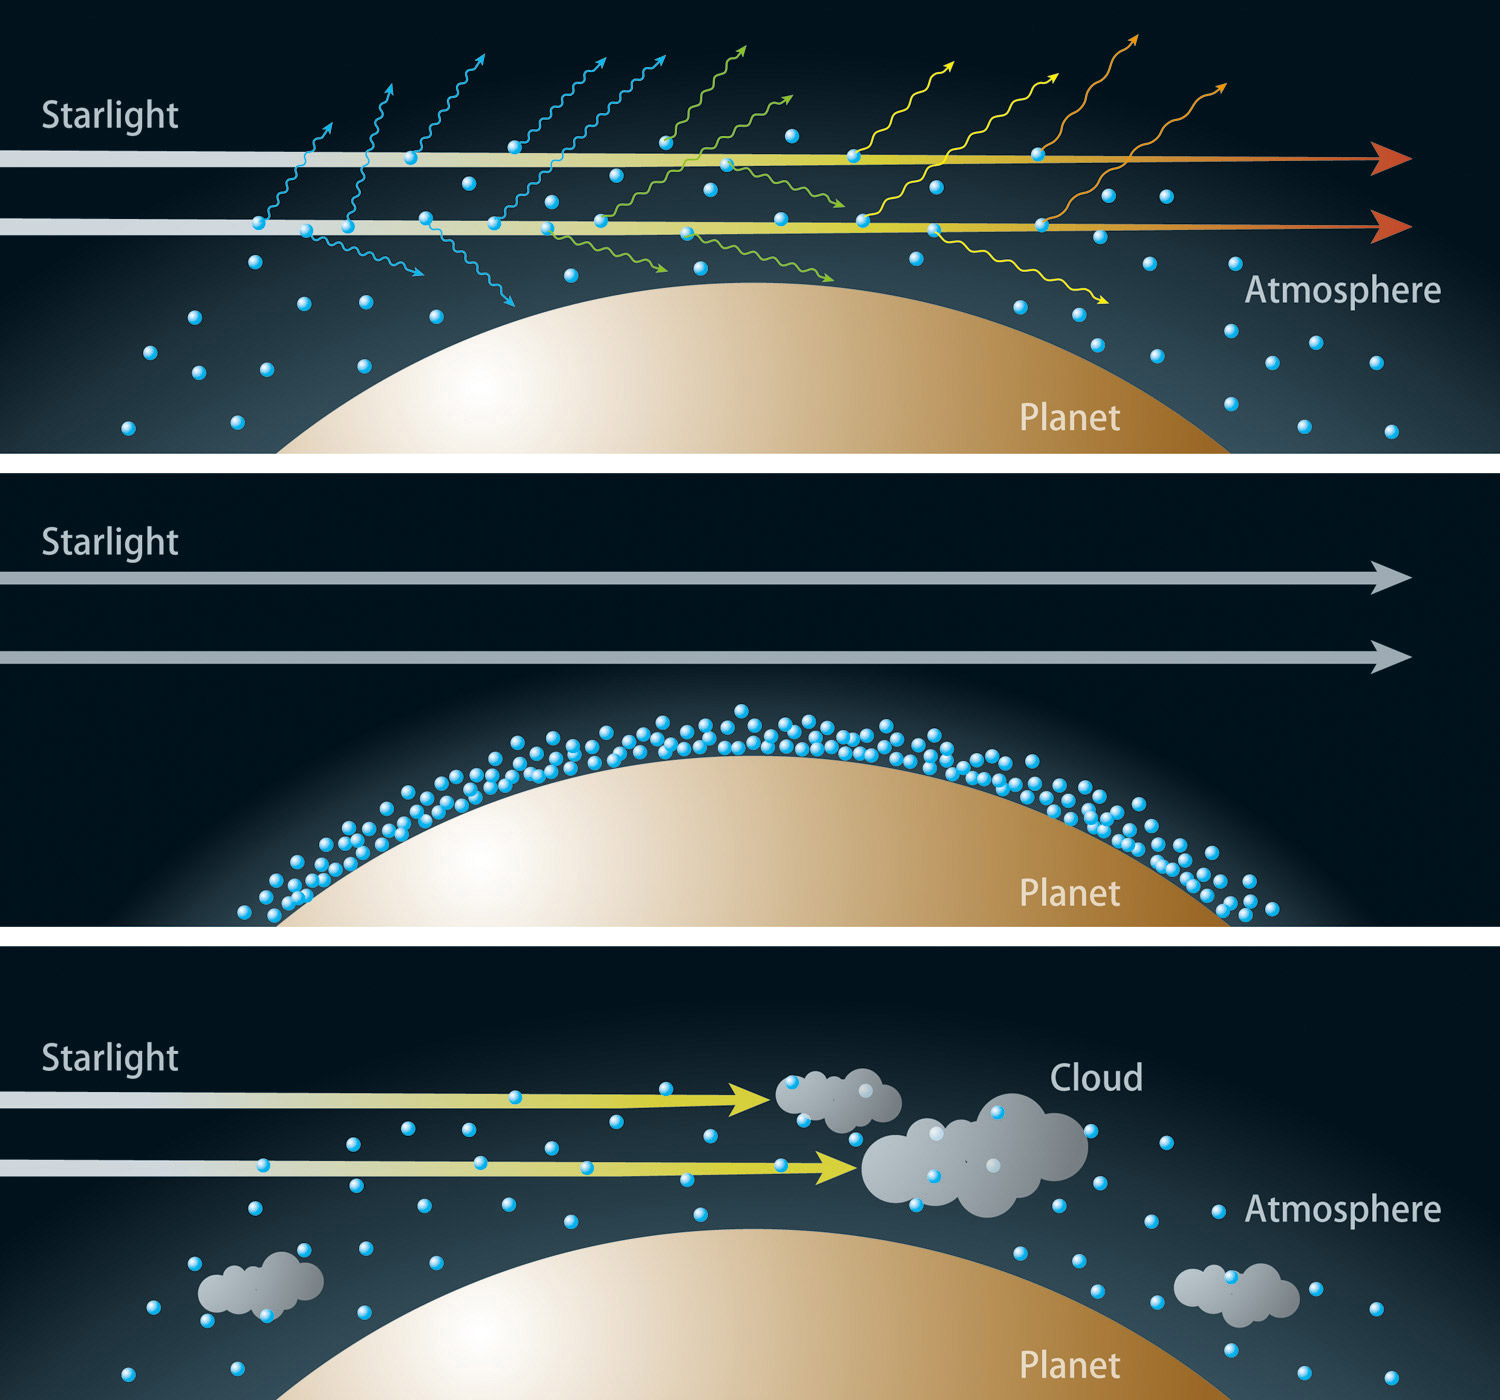 Artist’s schematic relating an exoplanet’s atmosphere to the visible light that passes through.